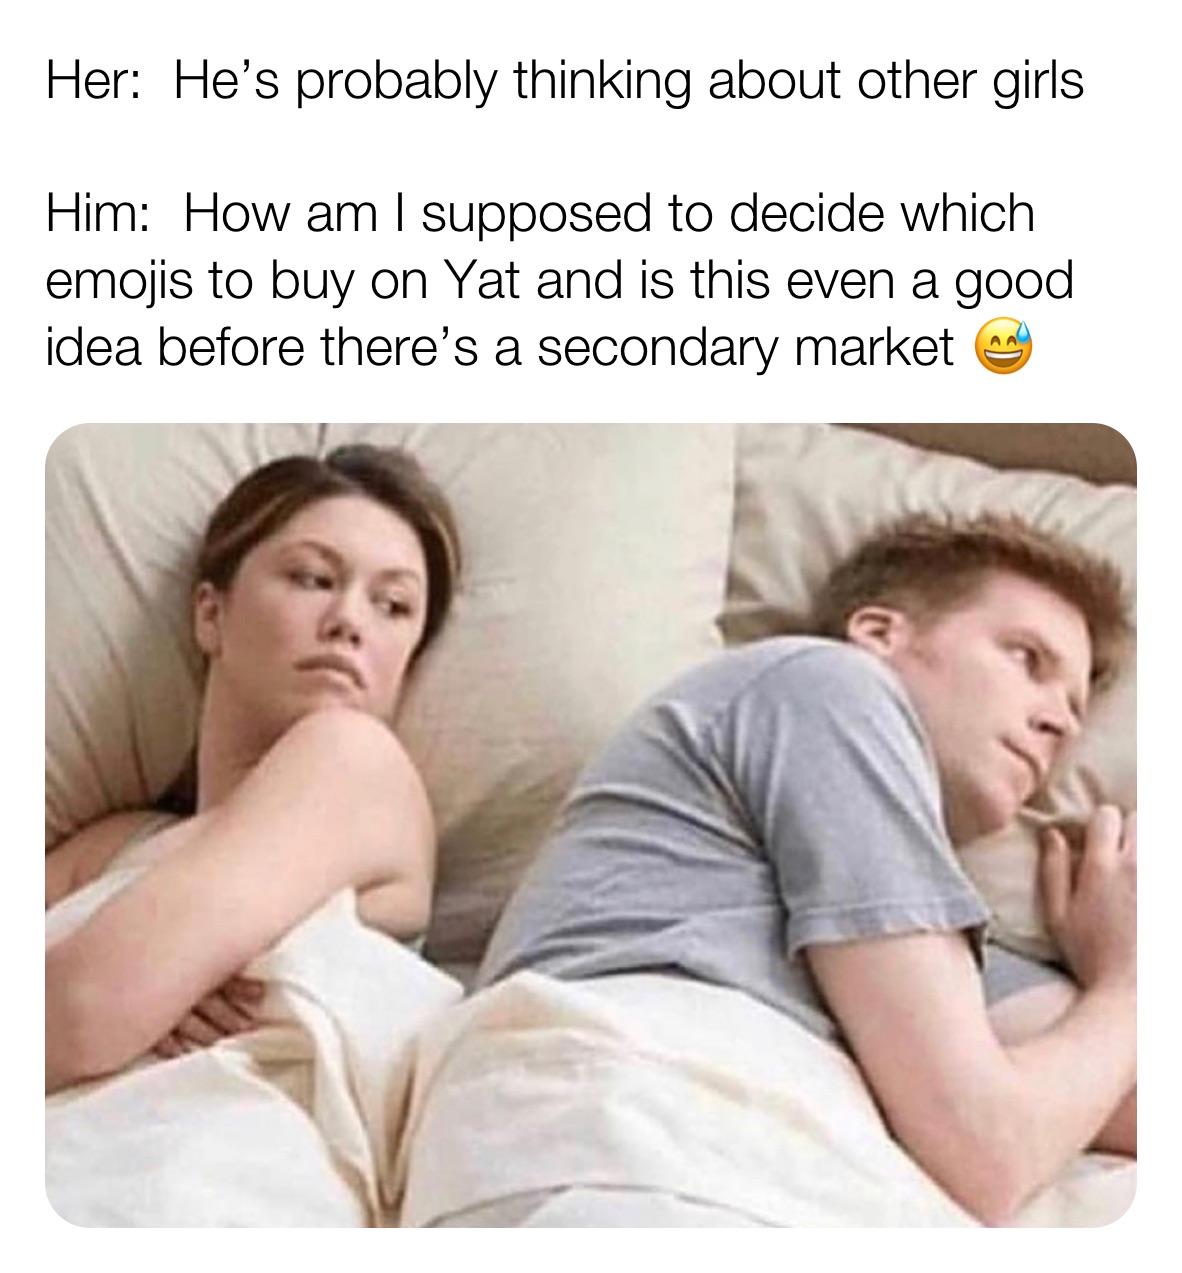 Her:  He’s probably thinking about other girls 

Him:  How am I supposed to decide which emojis to buy on Yat and is this even a good idea before there’s a secondary market 😅